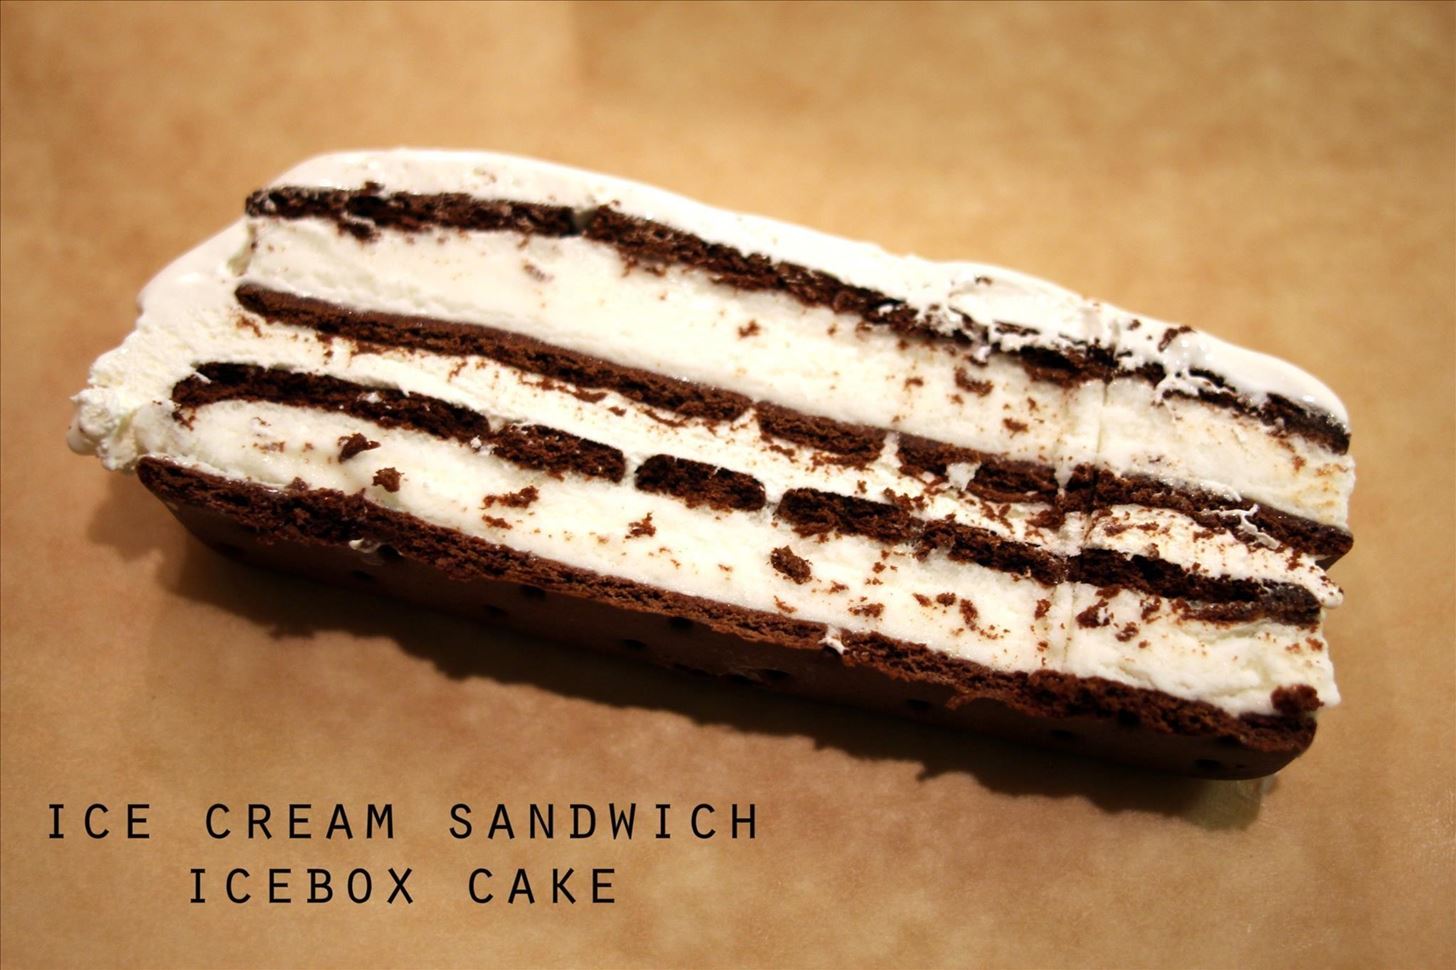 How to Make a No-Bake Ice Cream Sandwich Cake in 10 Minutes